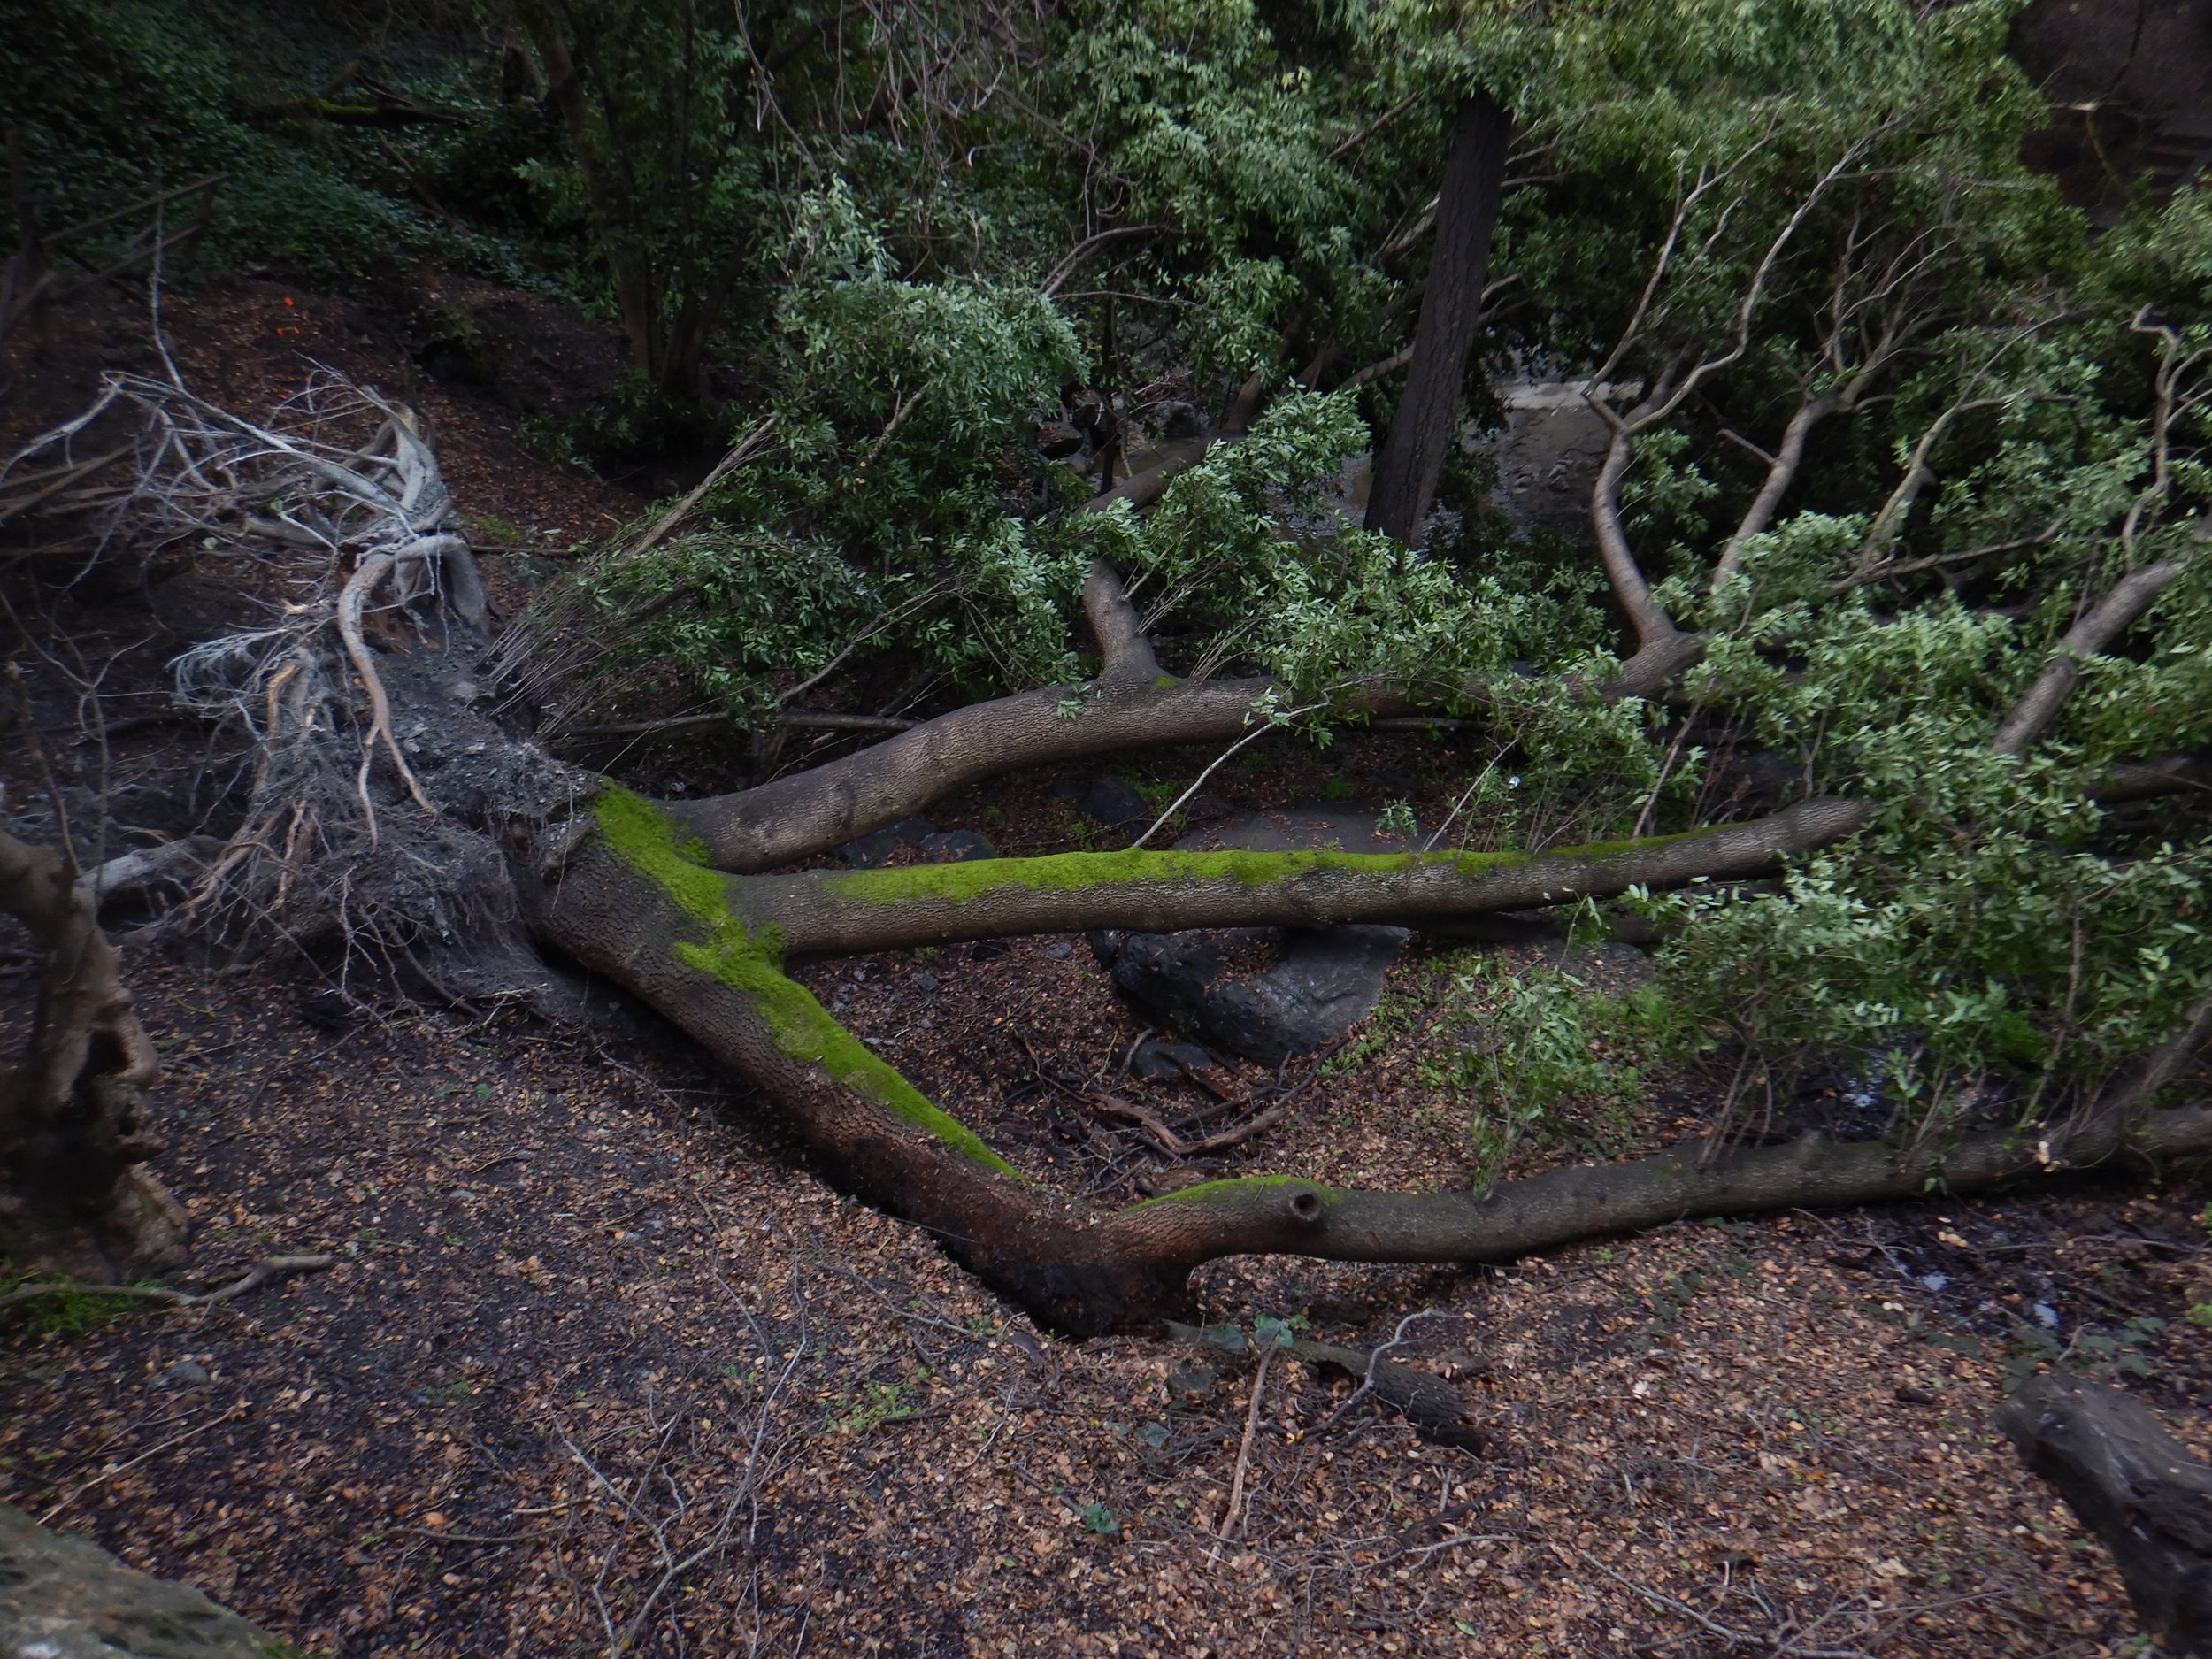 Heavy, wet, and previously exposed to many years of drought, we watched this tree fall before our eyes.